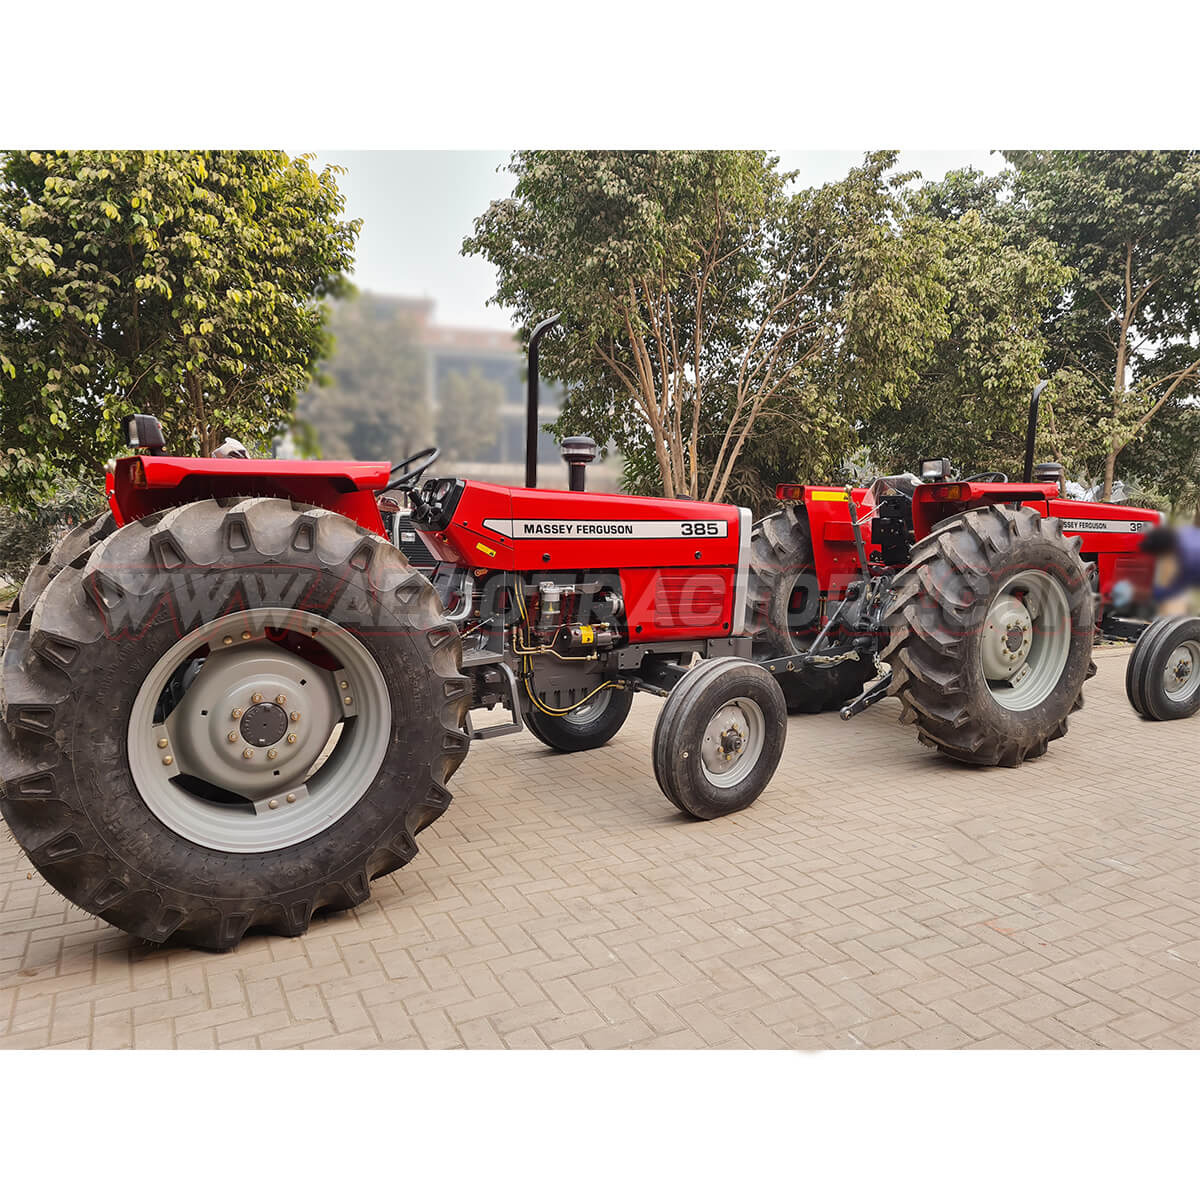 MF 385 2WD TRACTOR FOR SALE